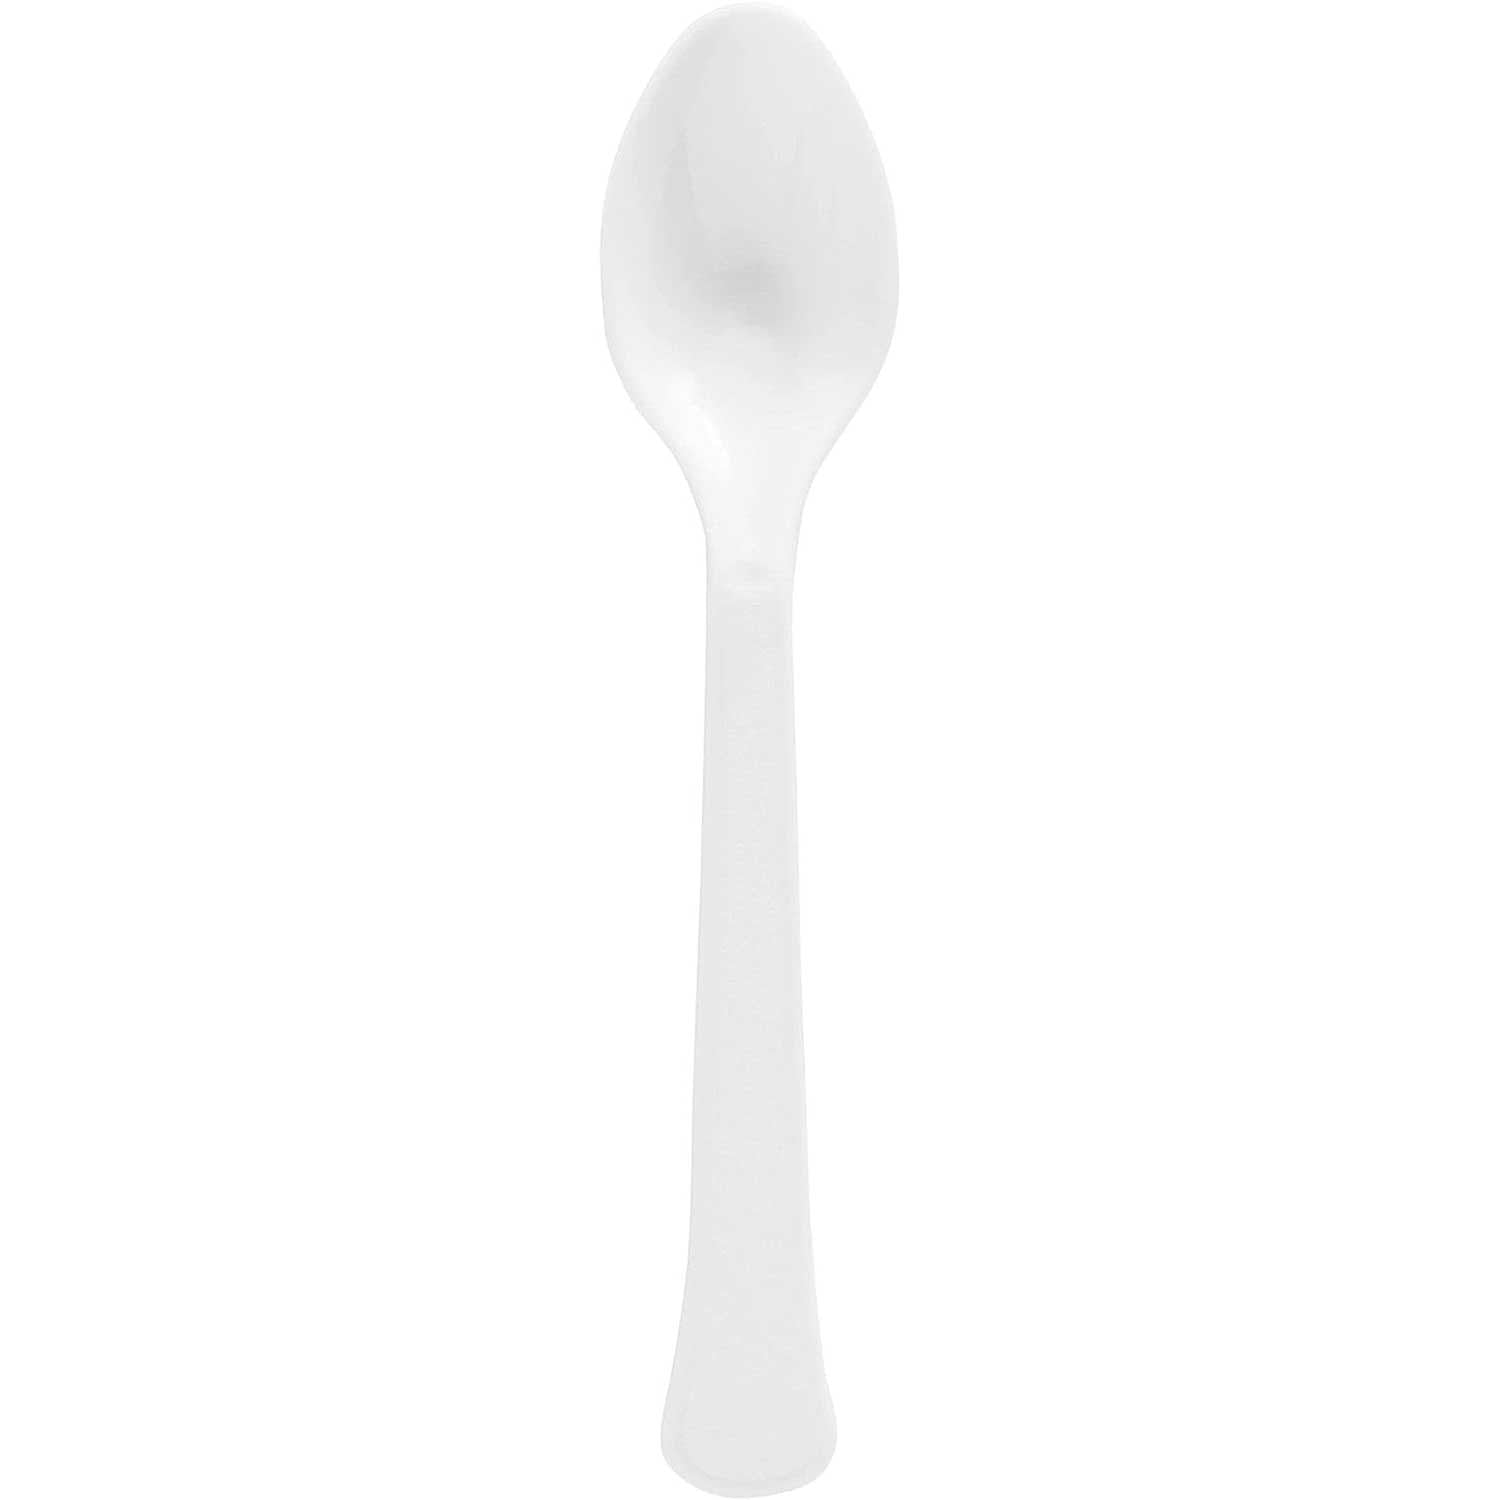 Frosty White Heavy Weight Plastic Spoon 20pcs